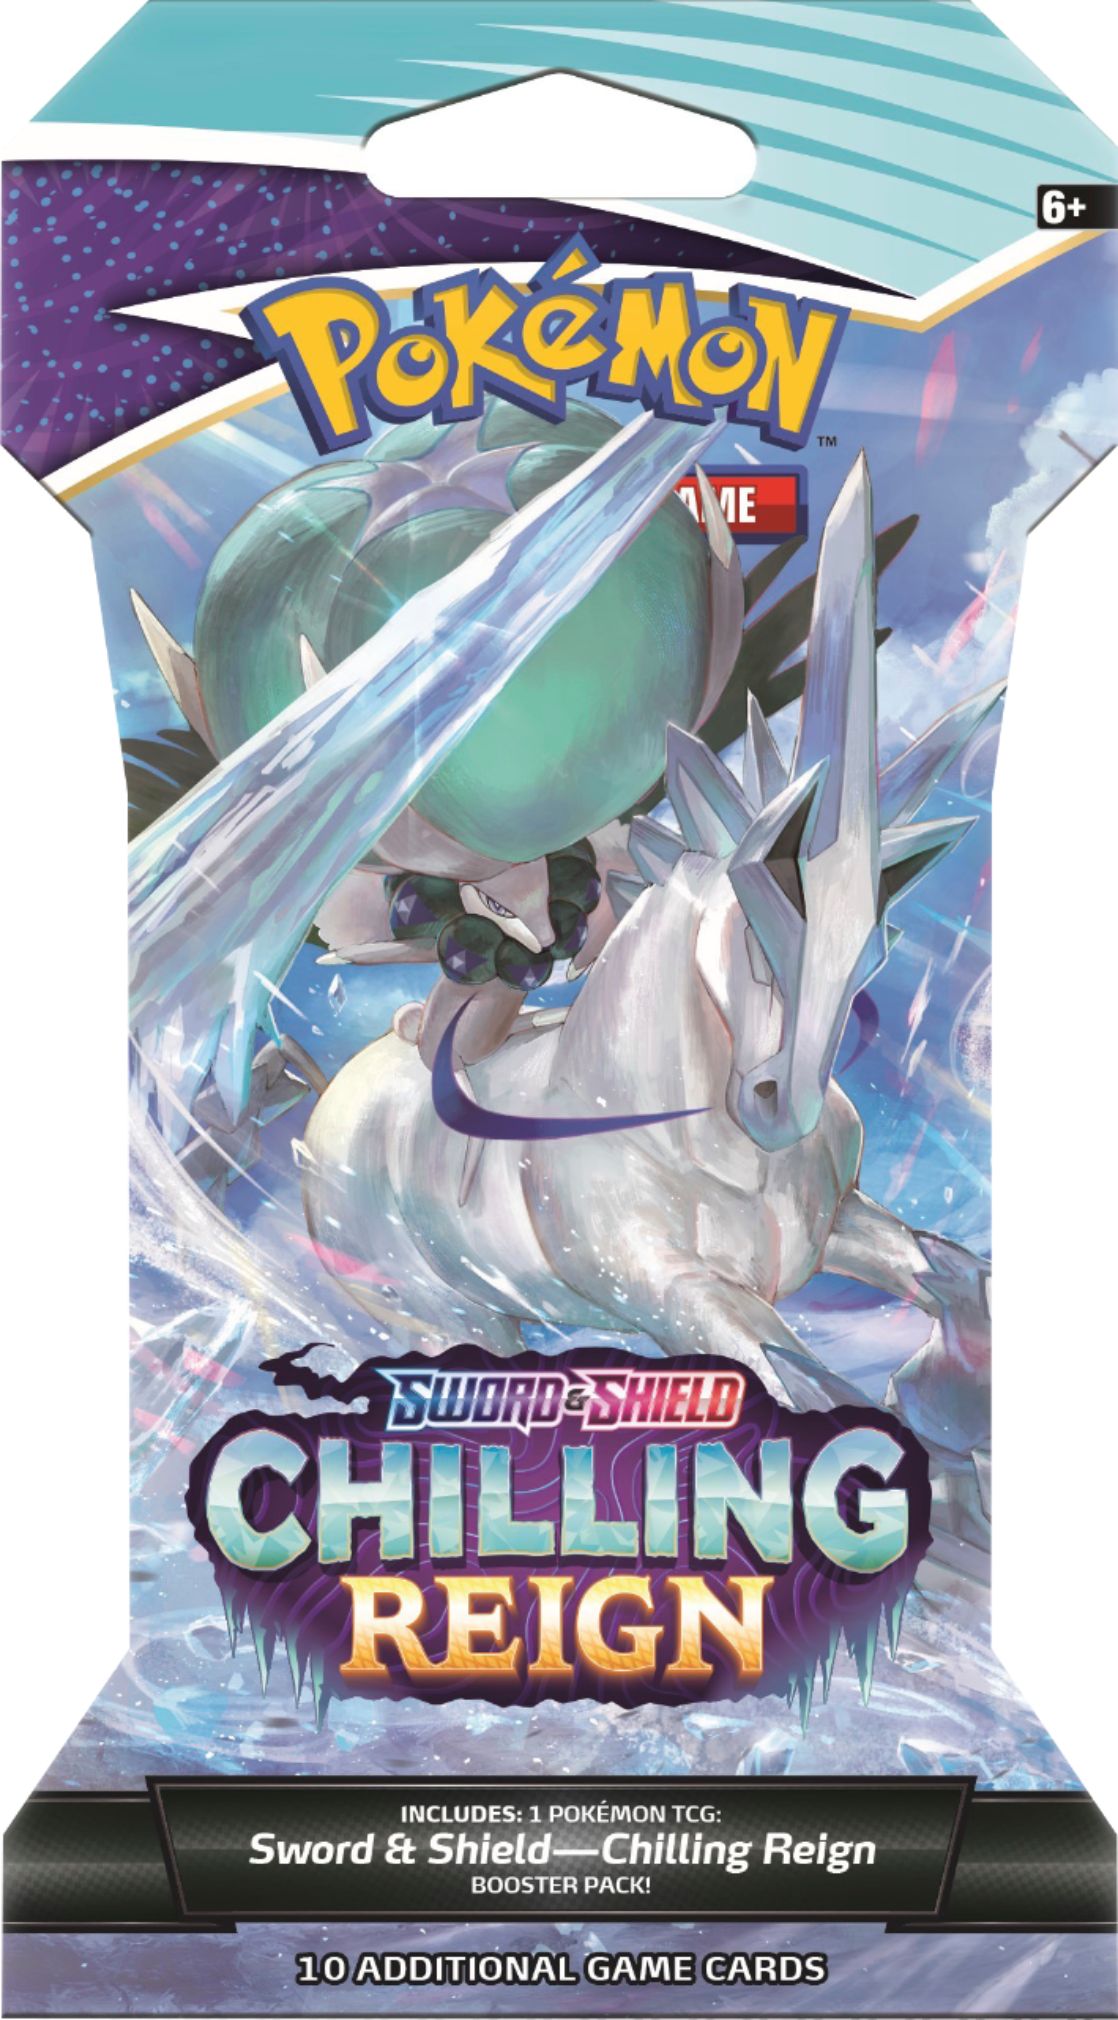 8 Random Packs Pokemon Sword and Shield Chilling Reign Sleeved Boosters 